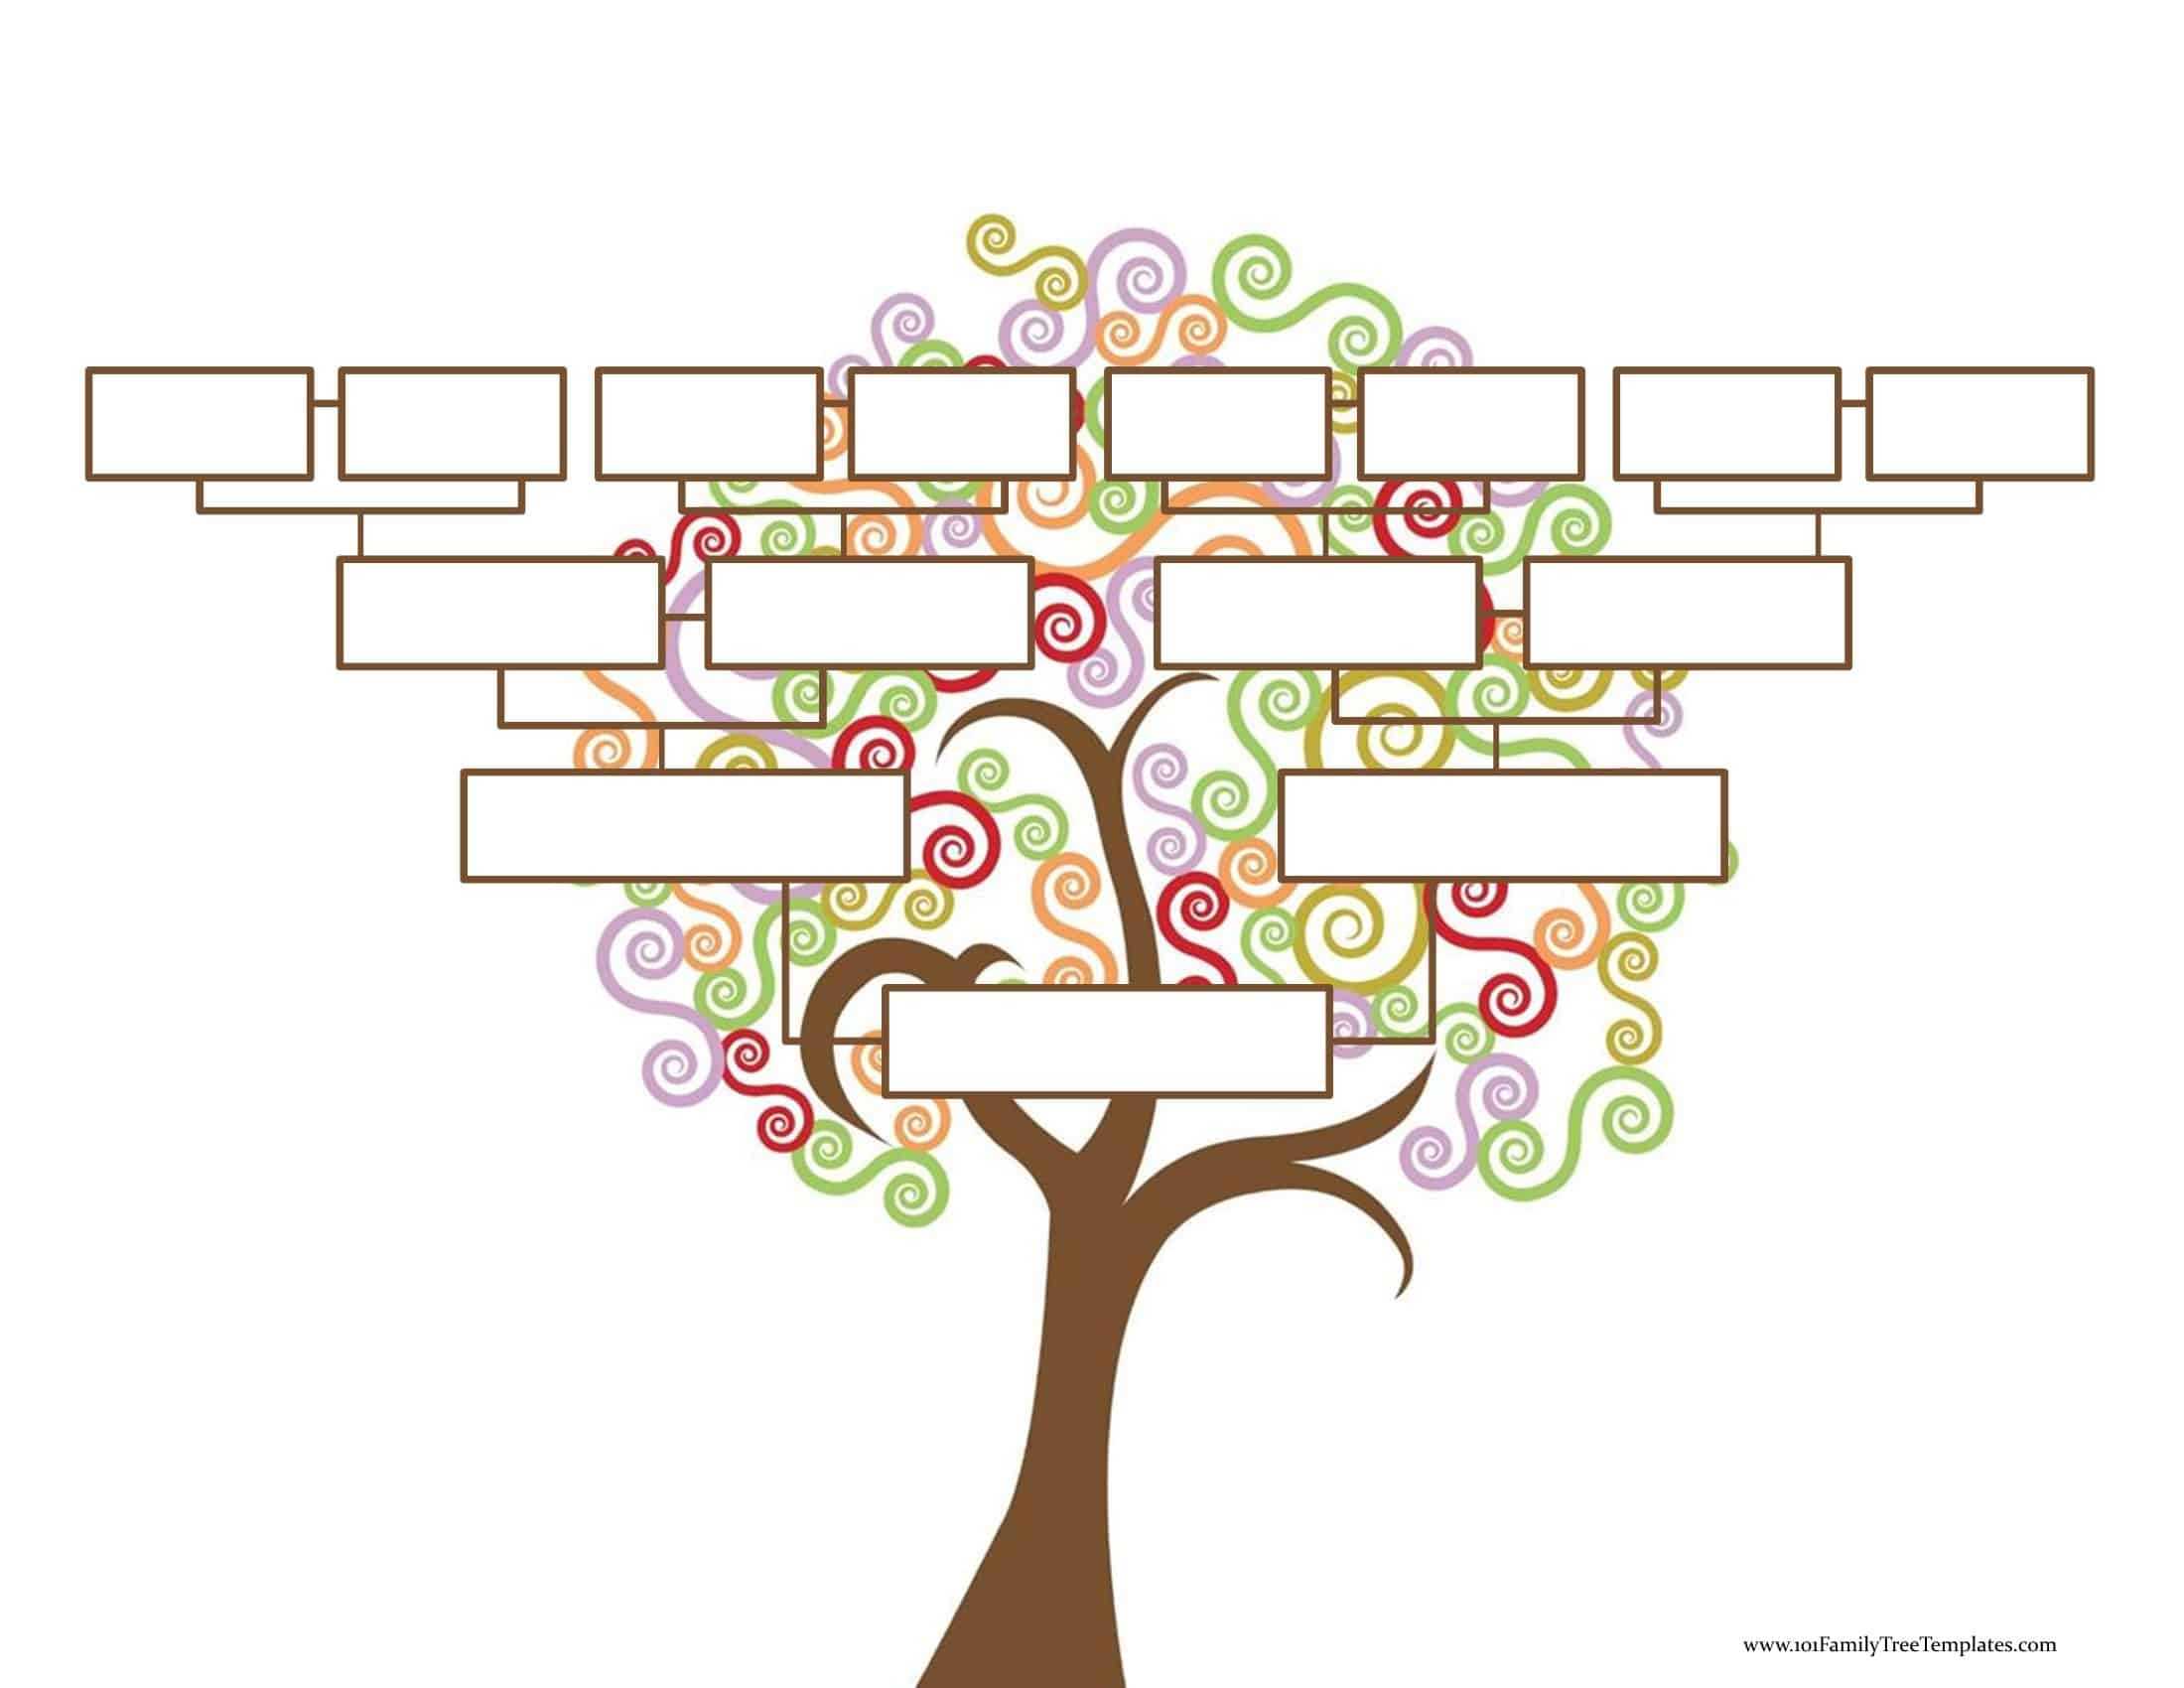 Blank Family Tree Template | Free Instant Download In Fill In The Blank Family Tree Template